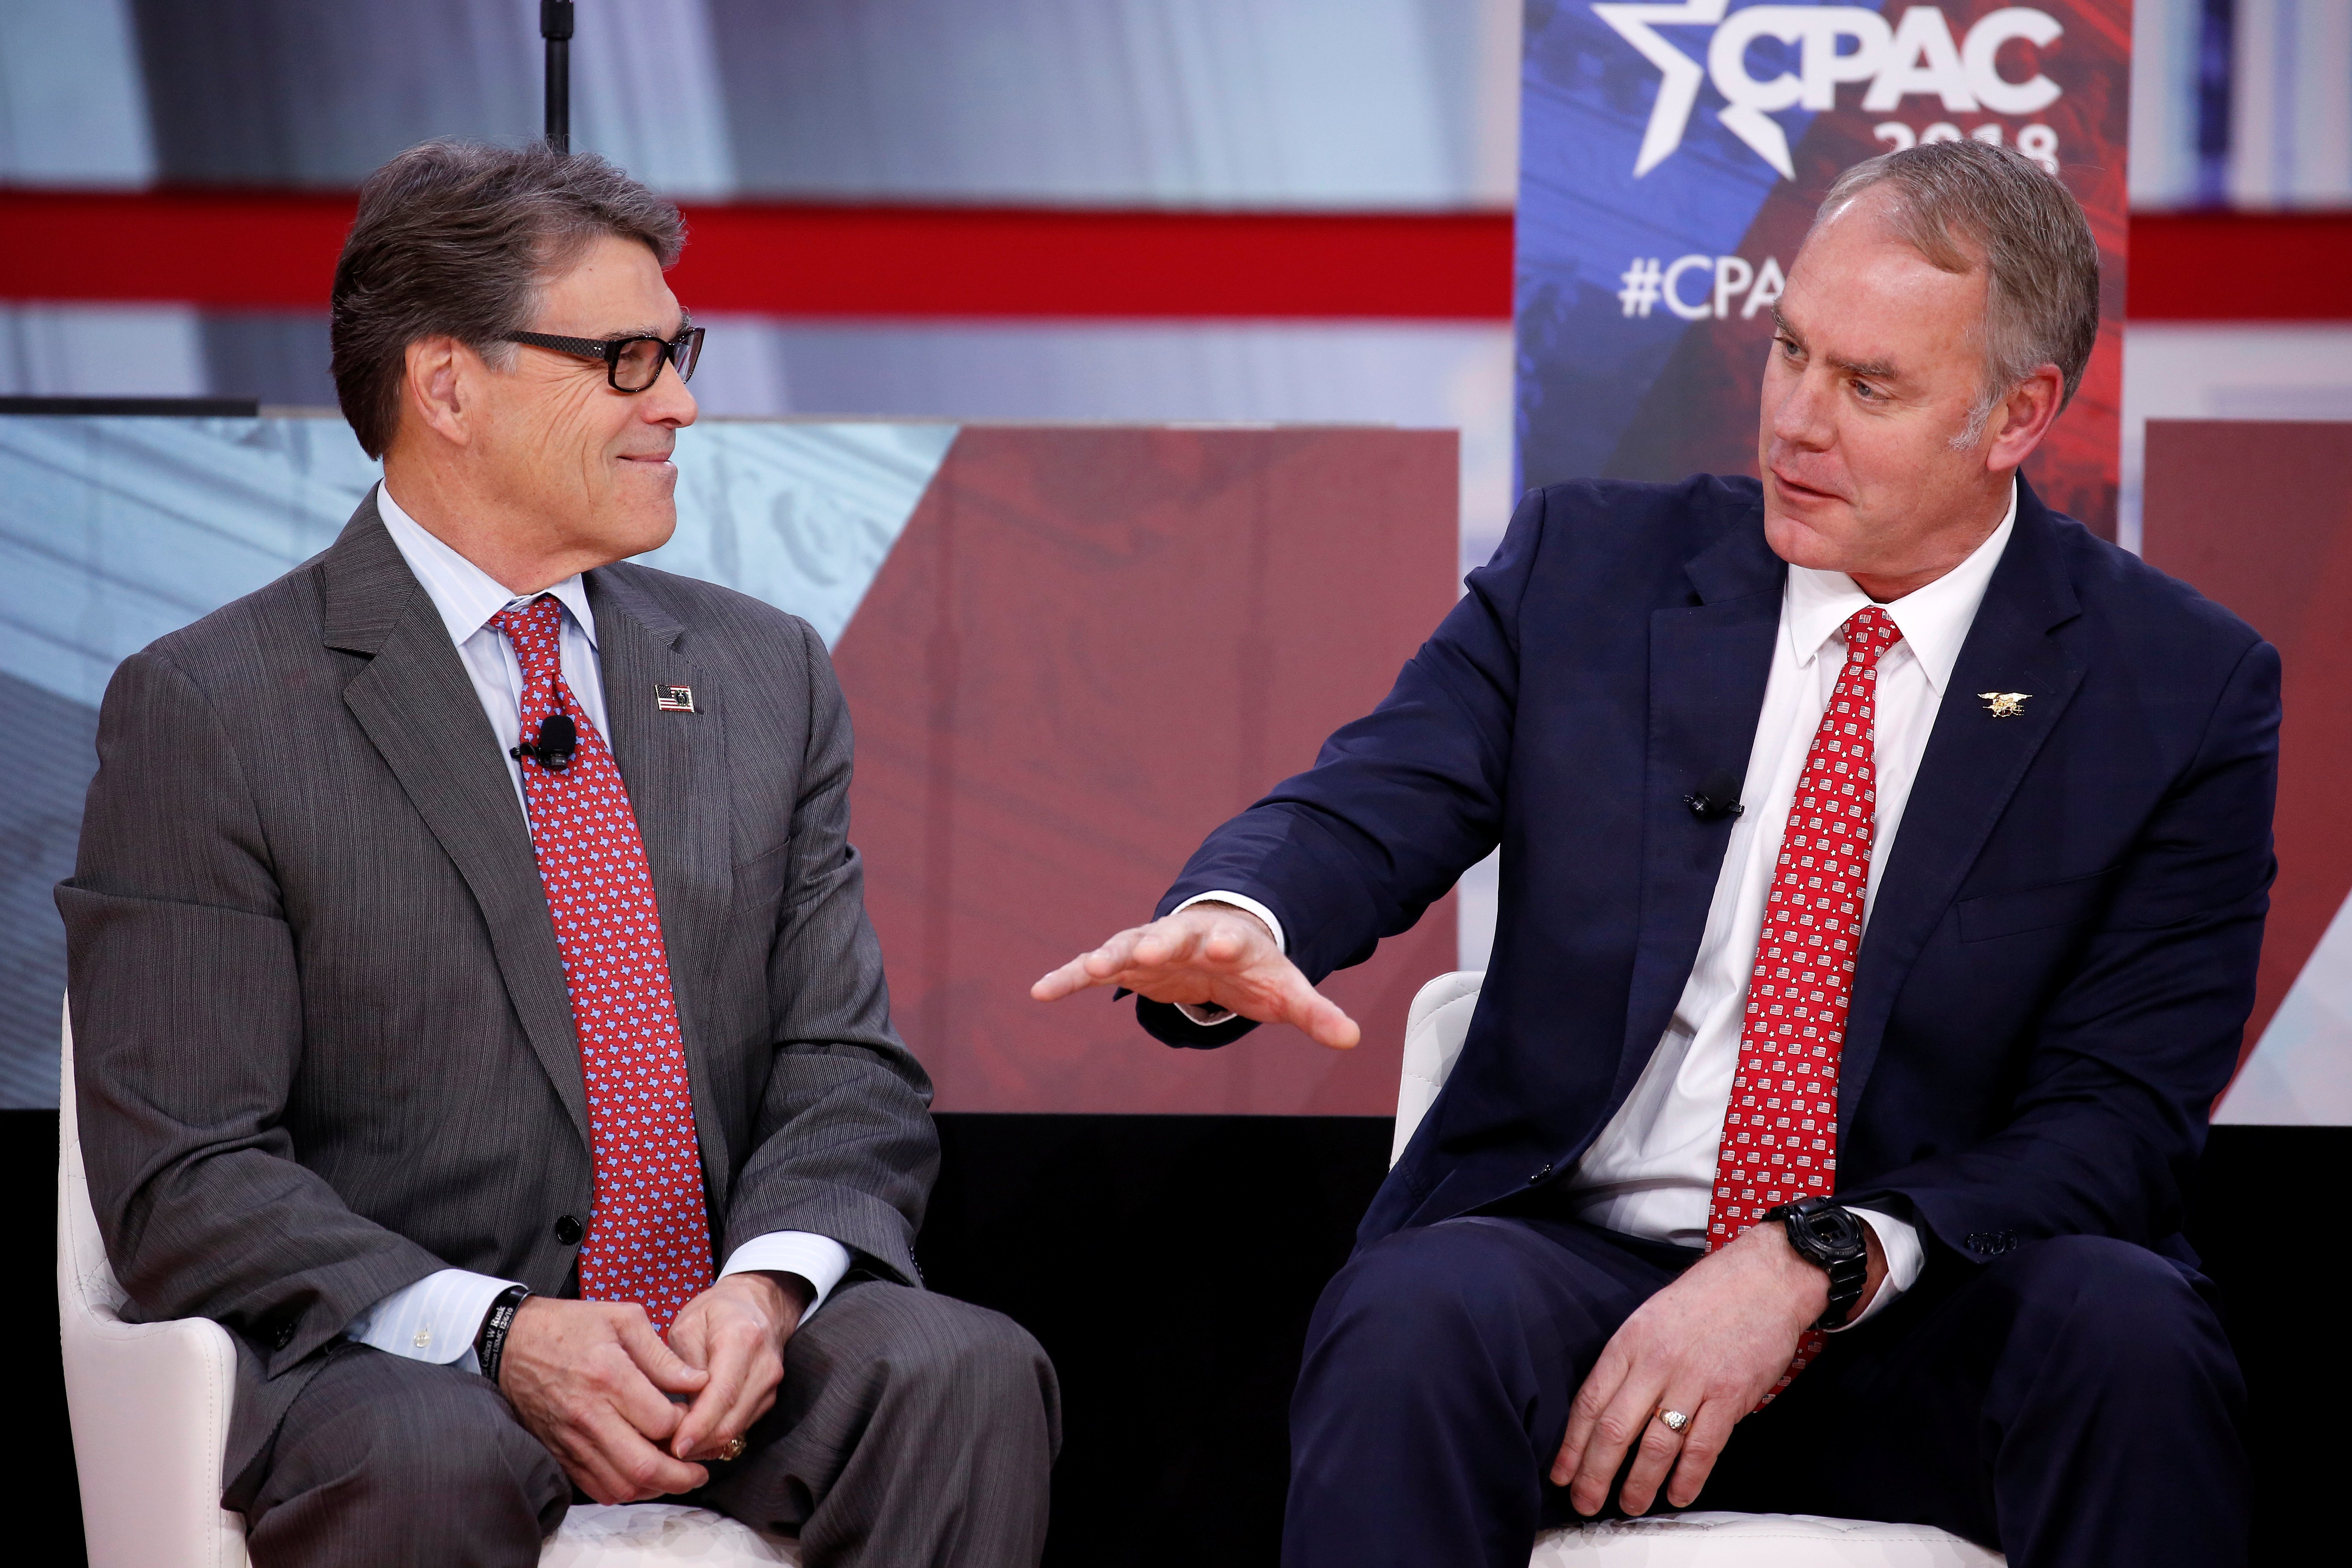 U.S. Secretary of Energy Rick Perry and U.S. Secretary of Interior Ryan Zinke speak at the Conservative Political Action Conference (CPAC) at National Harbor, Maryland, U.S., February 23, 2018. REUTERS/Joshua Roberts